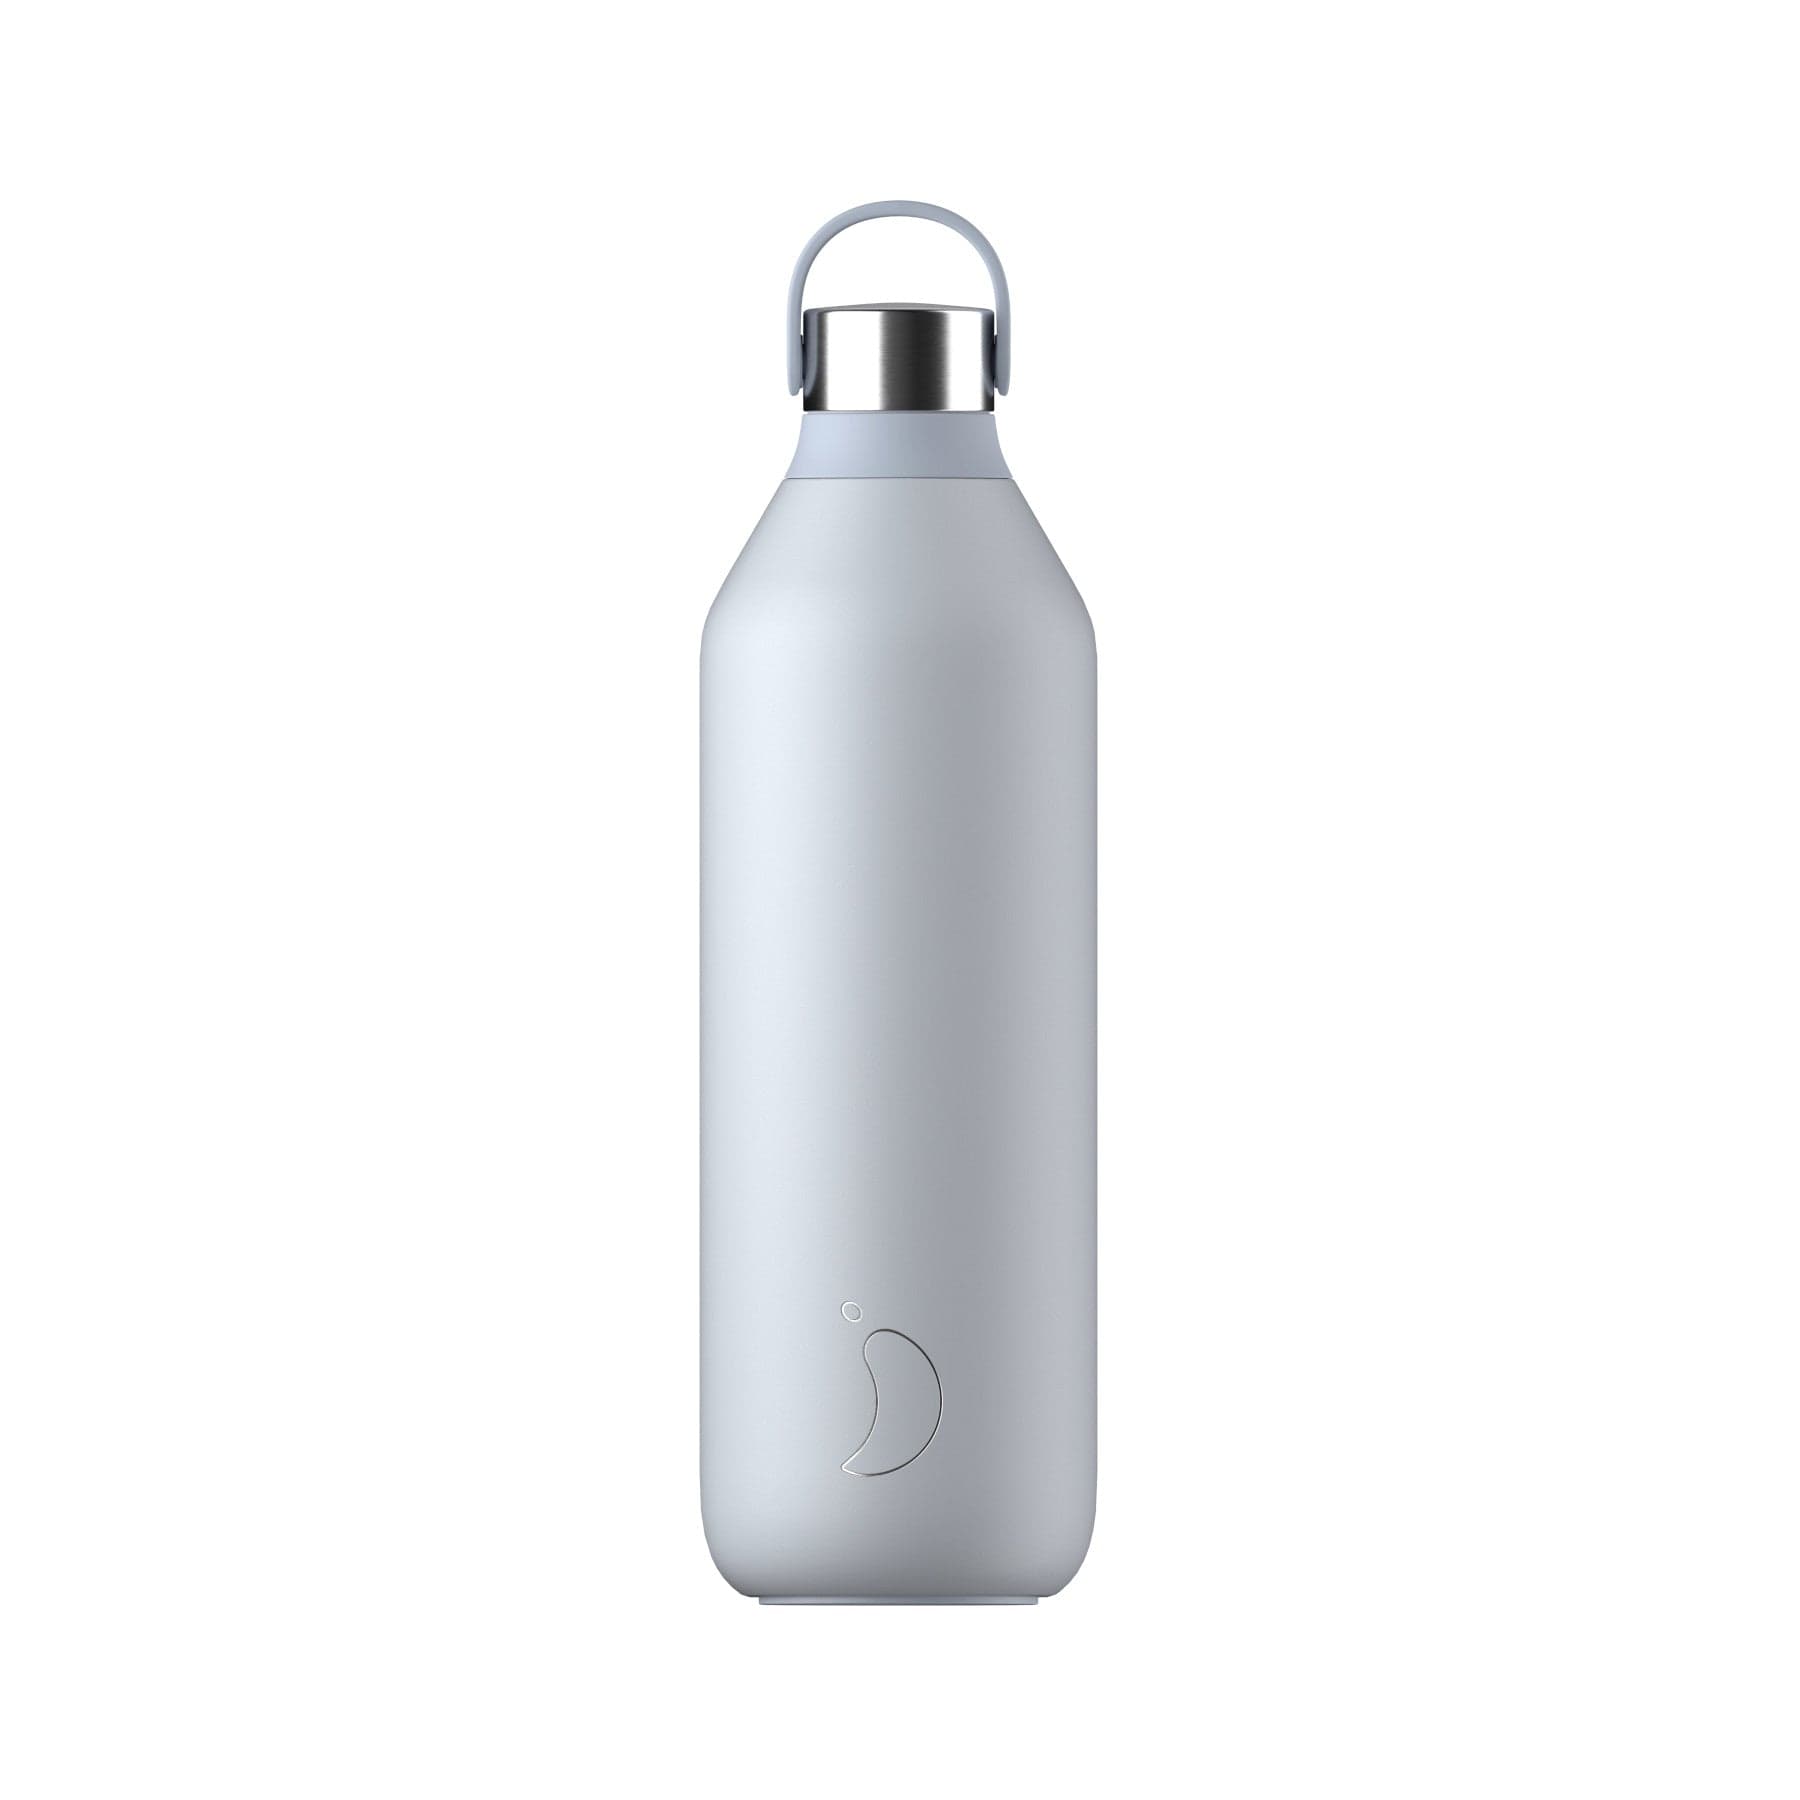 Insulated stainless steel water bottle, reusable, eco-friendly, silver color, with metallic cap and logo design on the front.